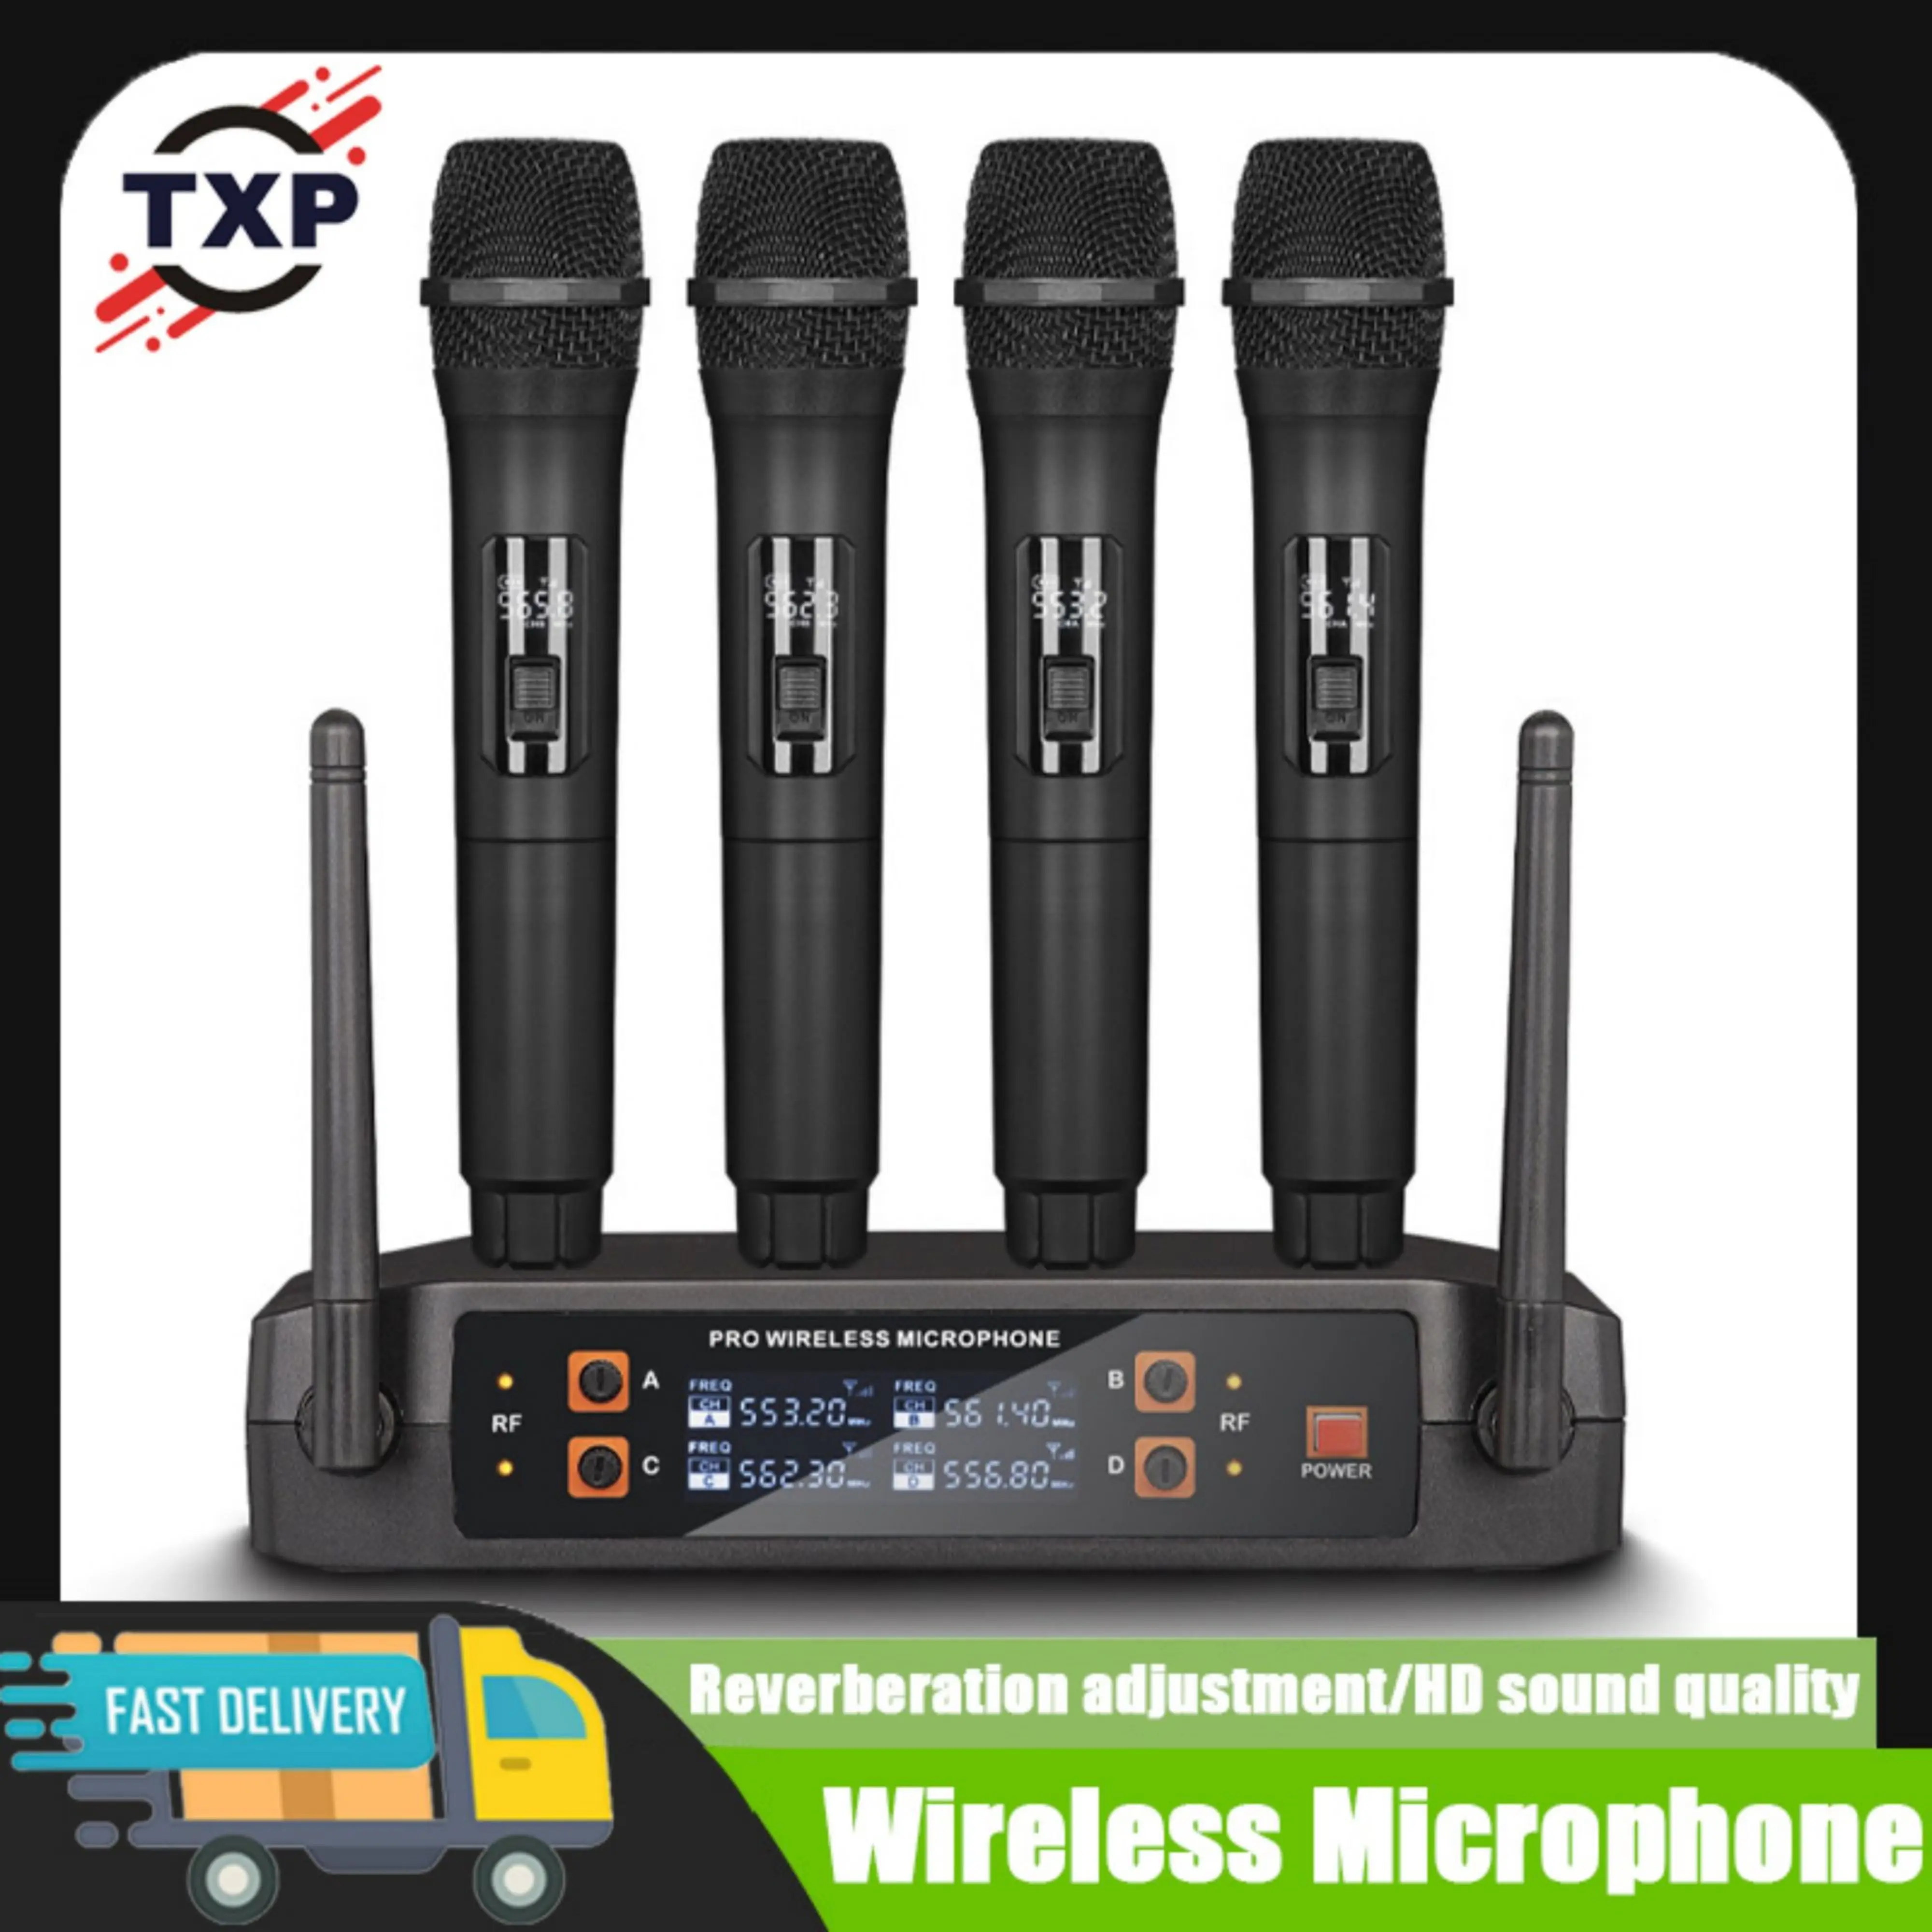 

New TXP-WU1 Wireless Microphone Handheld 4 Channel UHF Fixed Frequency Dynamic Microphone For Karaoke Wedding Party